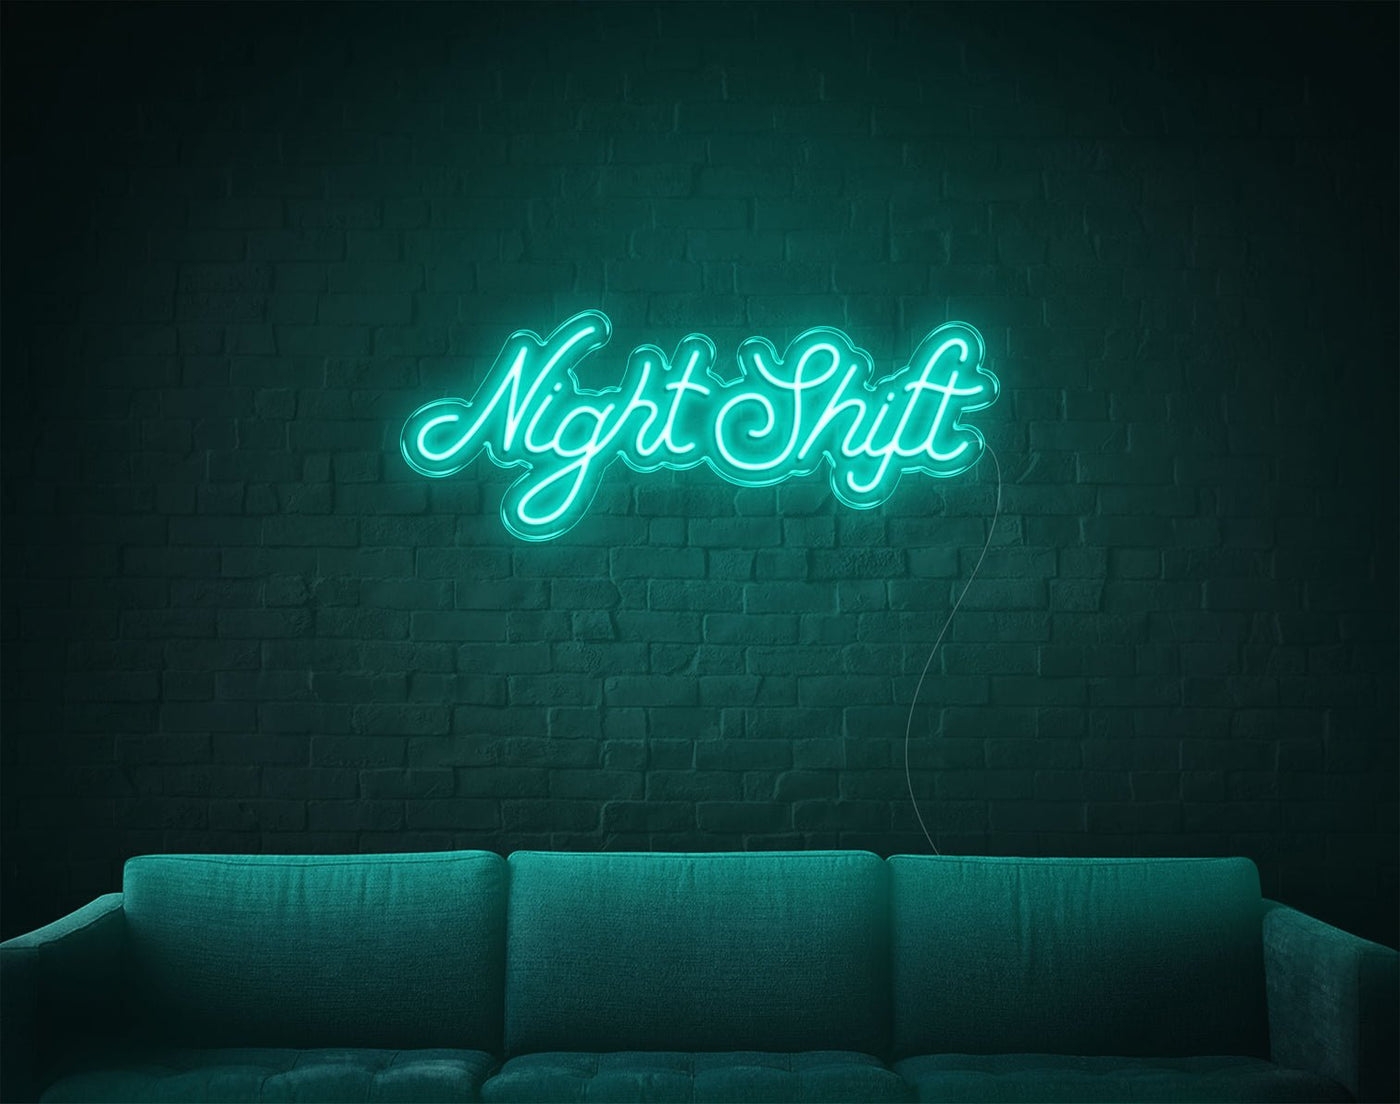 Nightshift LED Neon Sign - 11inch x 30inchTurquoise